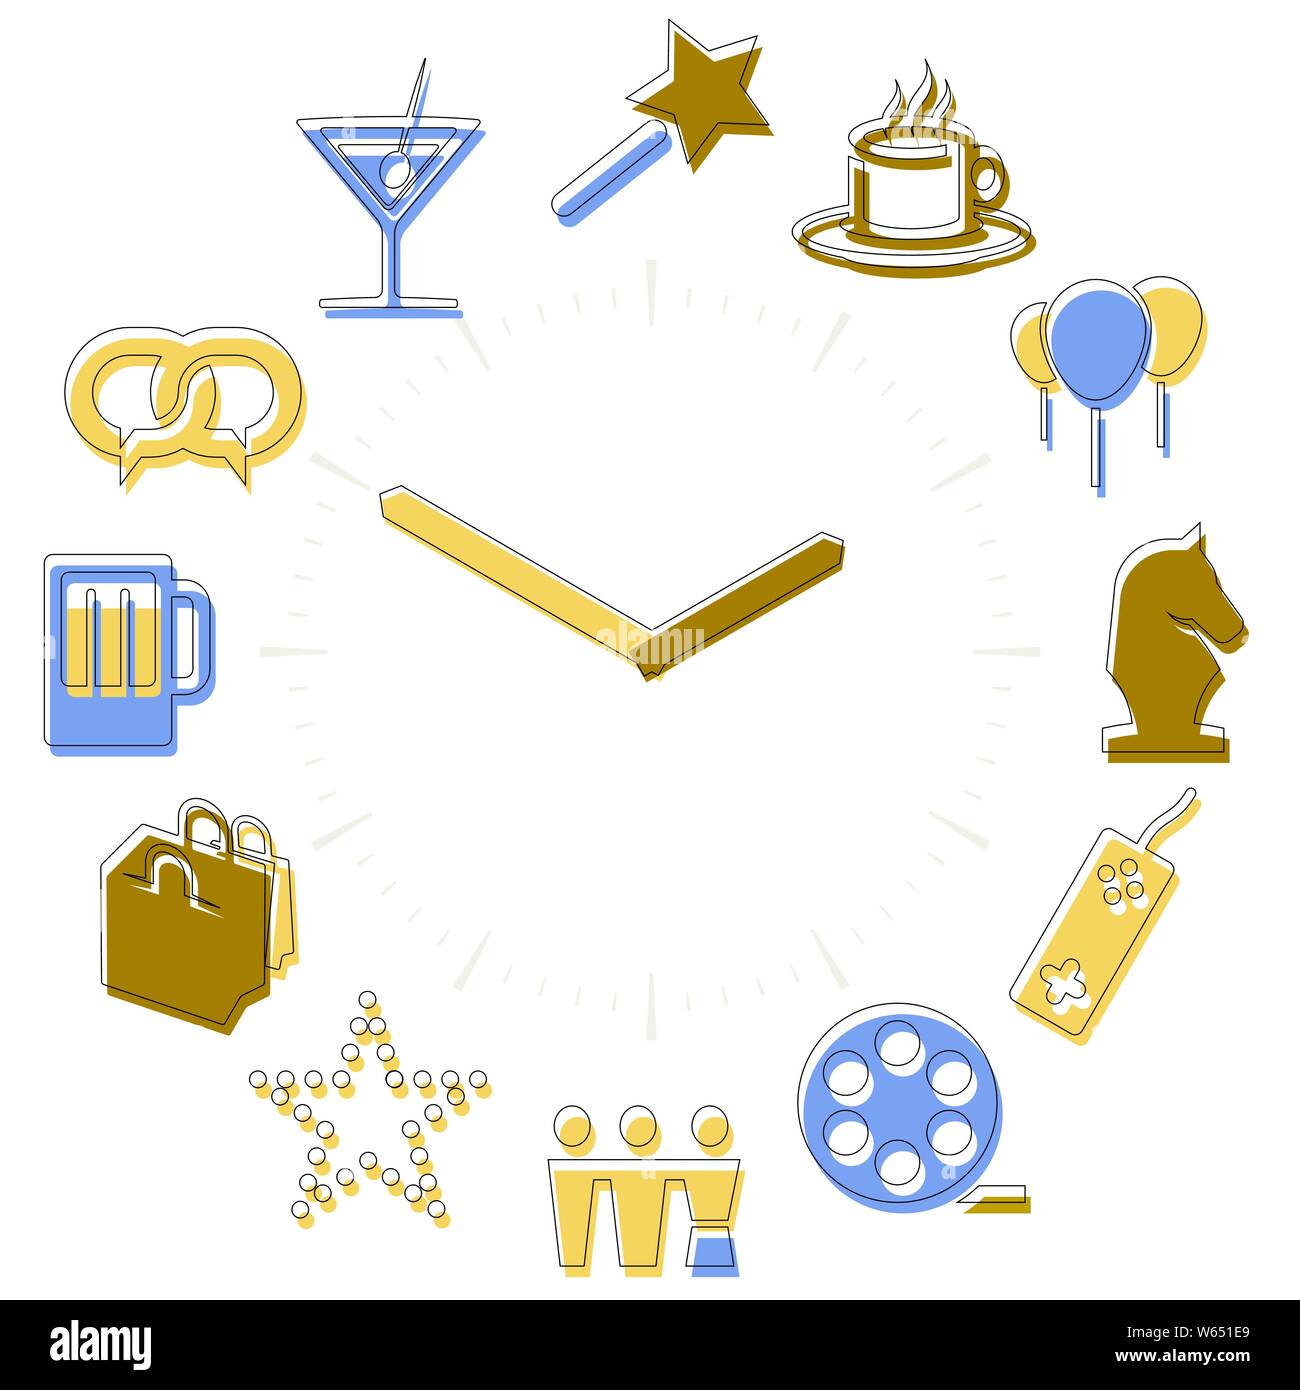 Vector illustration. Leisure time. Activities icons in a watch sphere with hours. Stock Vector